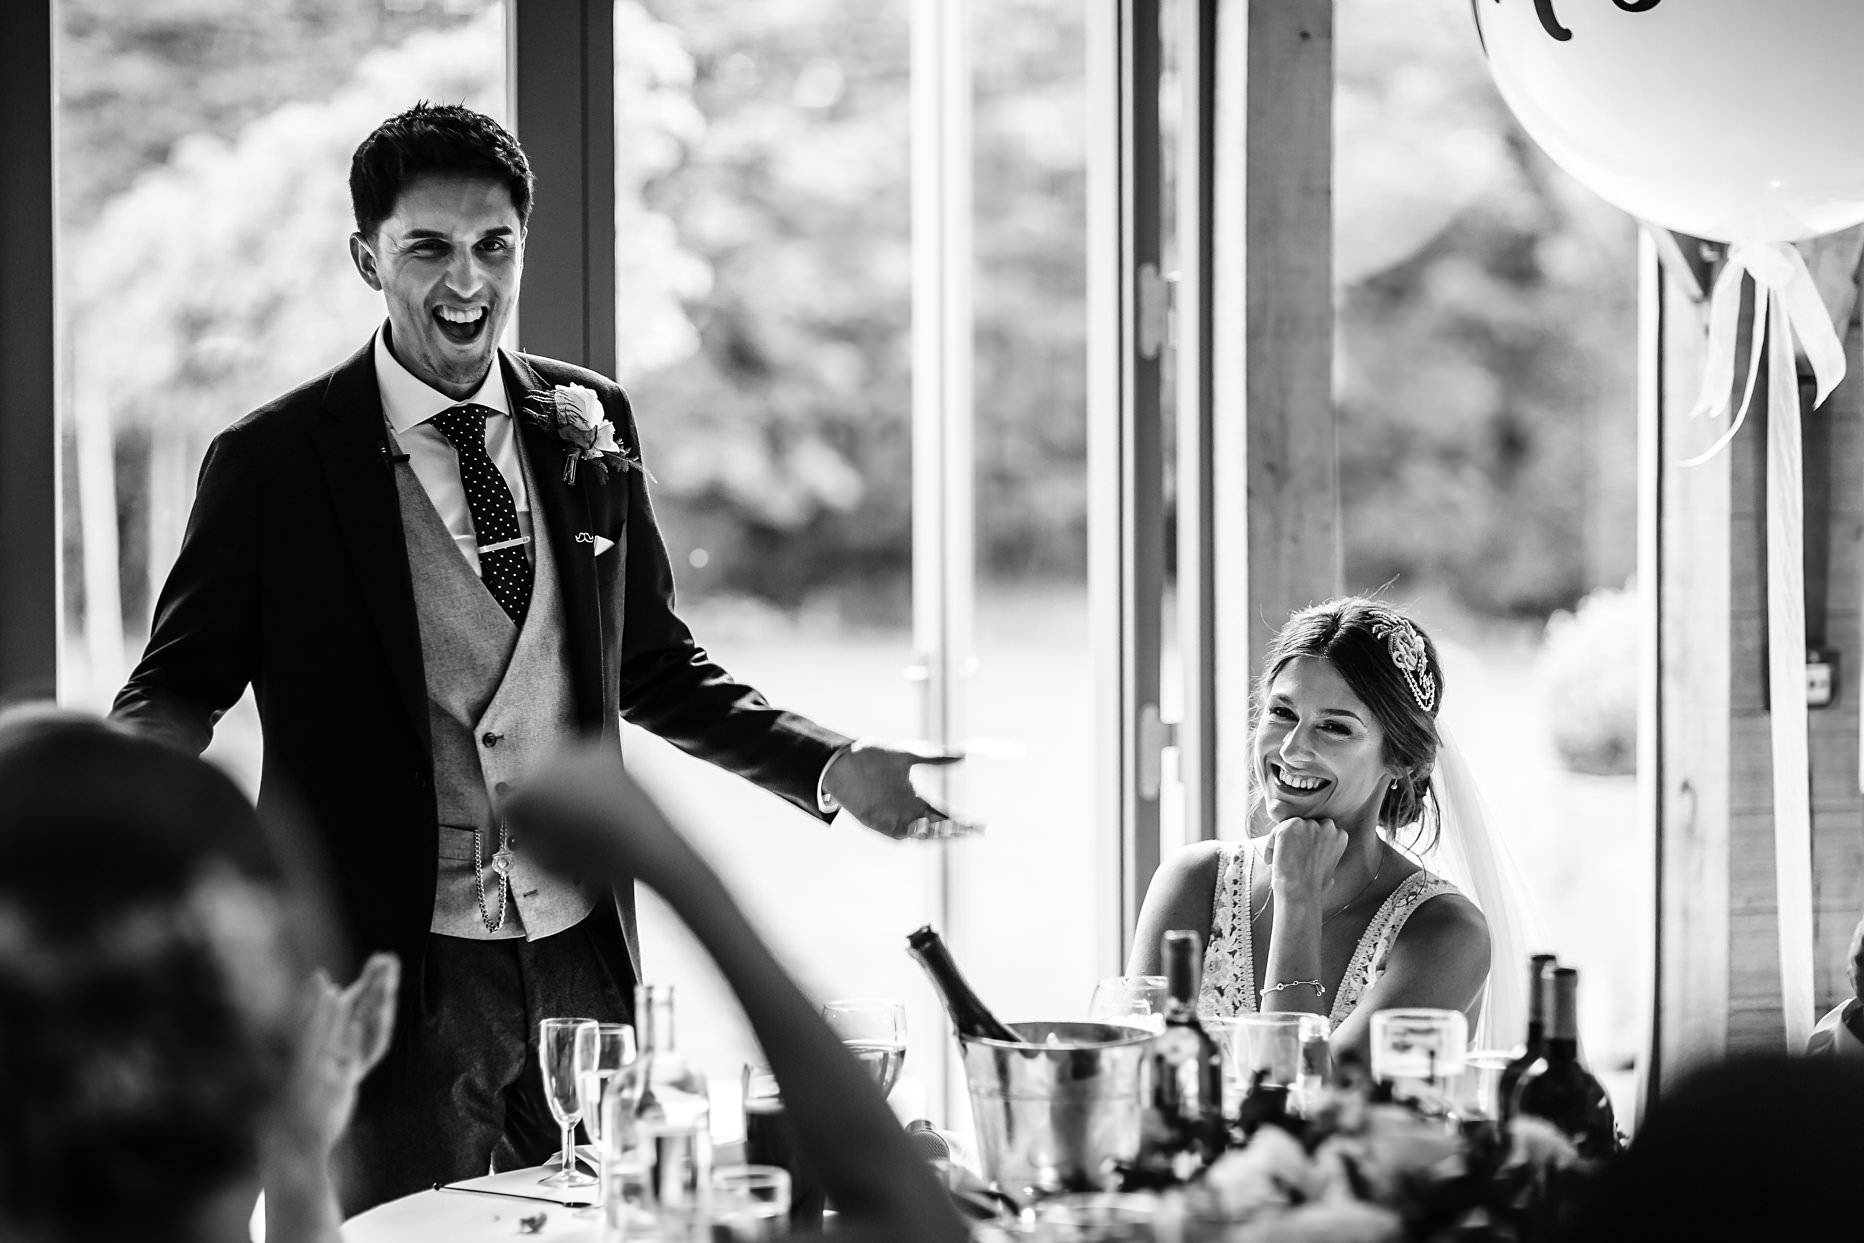 Groom delivering a speech on his wedding day. His wife is sat next to him laughing. Photograph taken at Hazel Gap Barn.